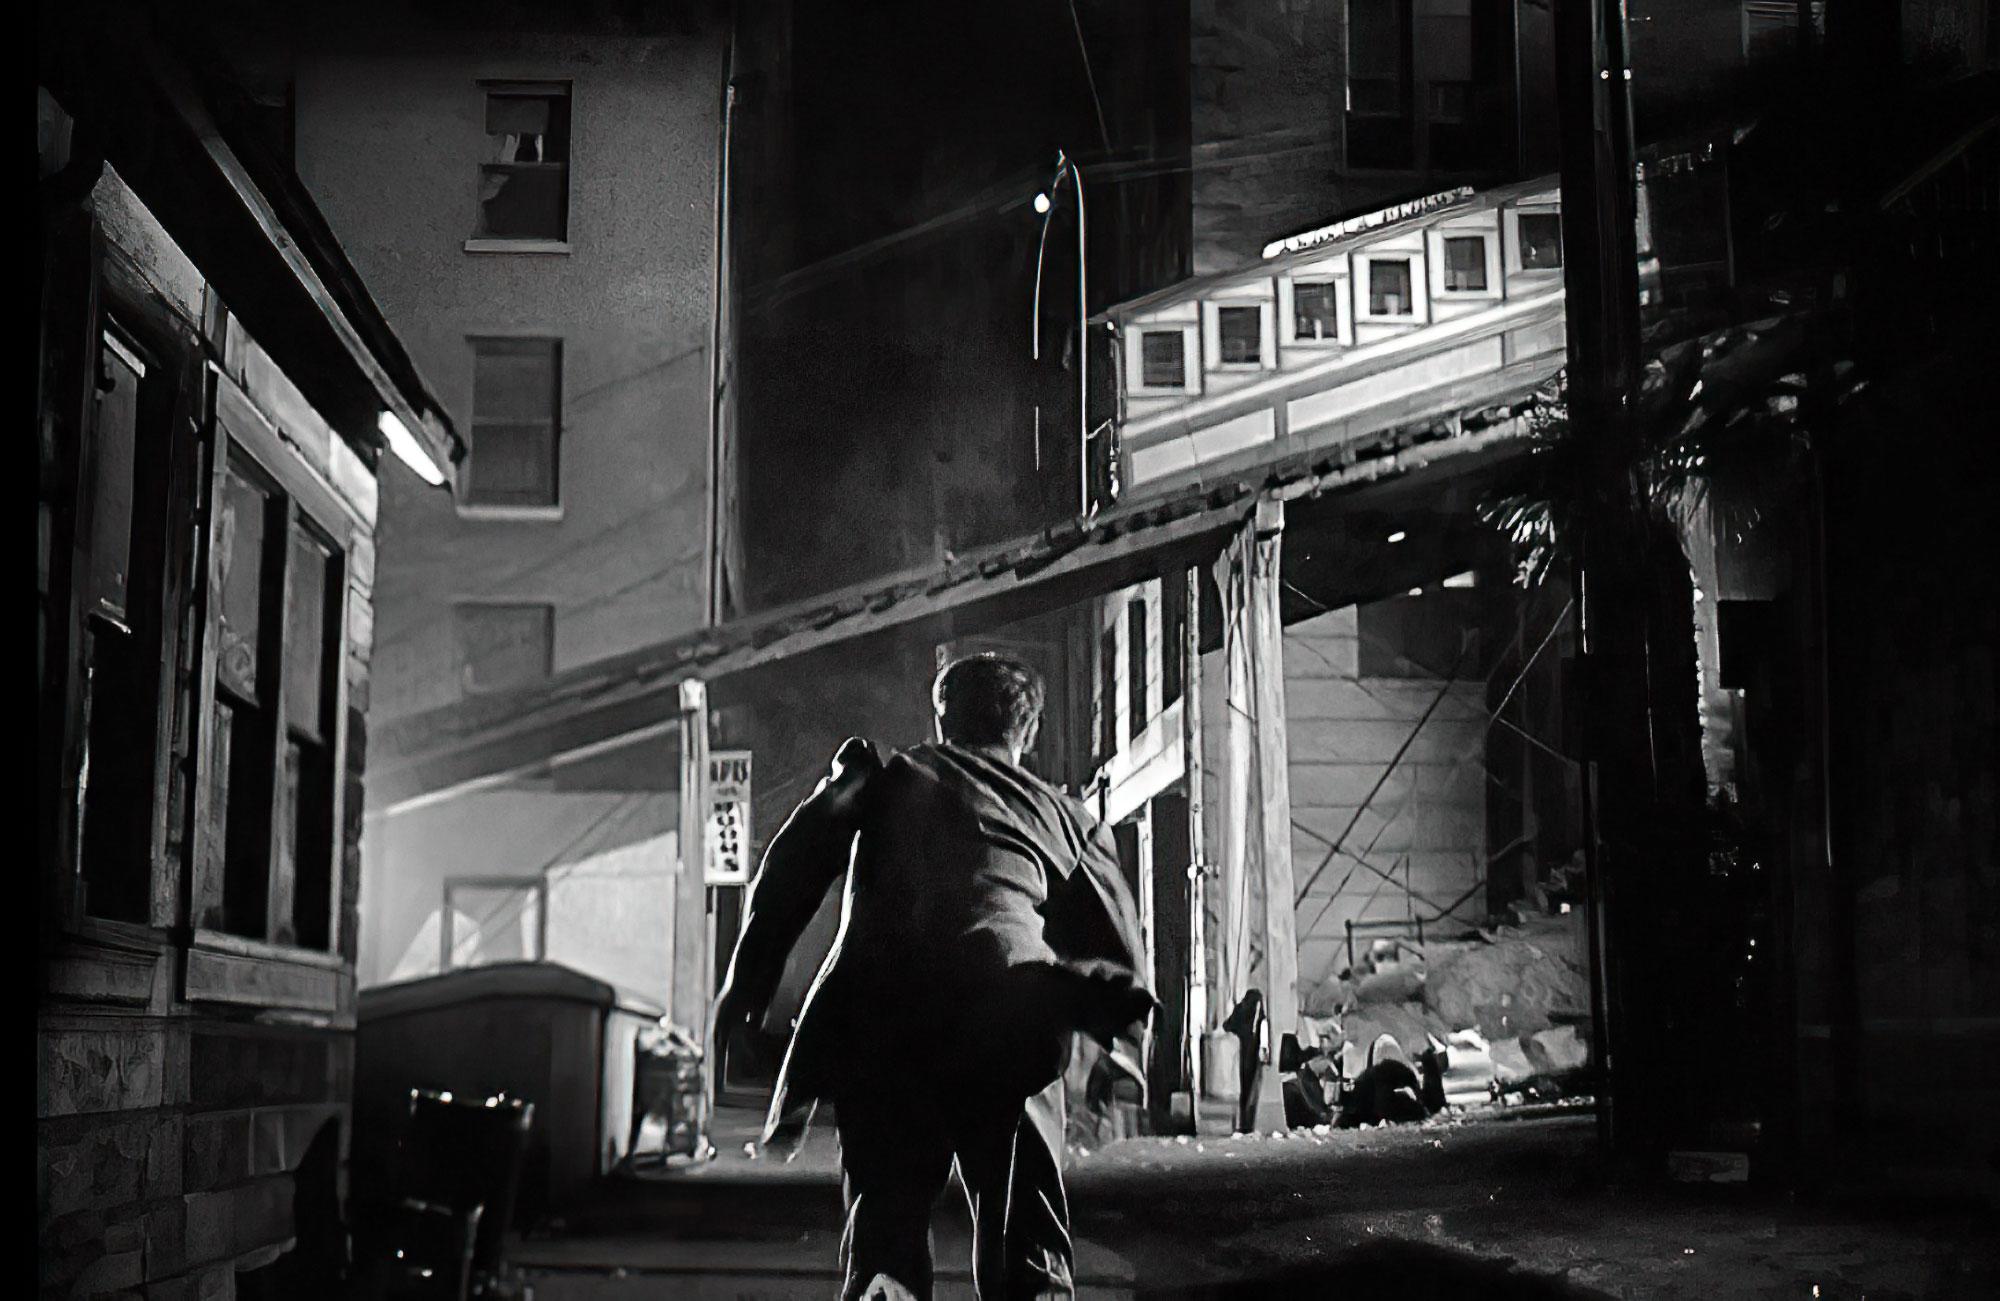 The Masterpieces (1st tier) act of violence 29 Your Complete Guide to Classic Film Noir